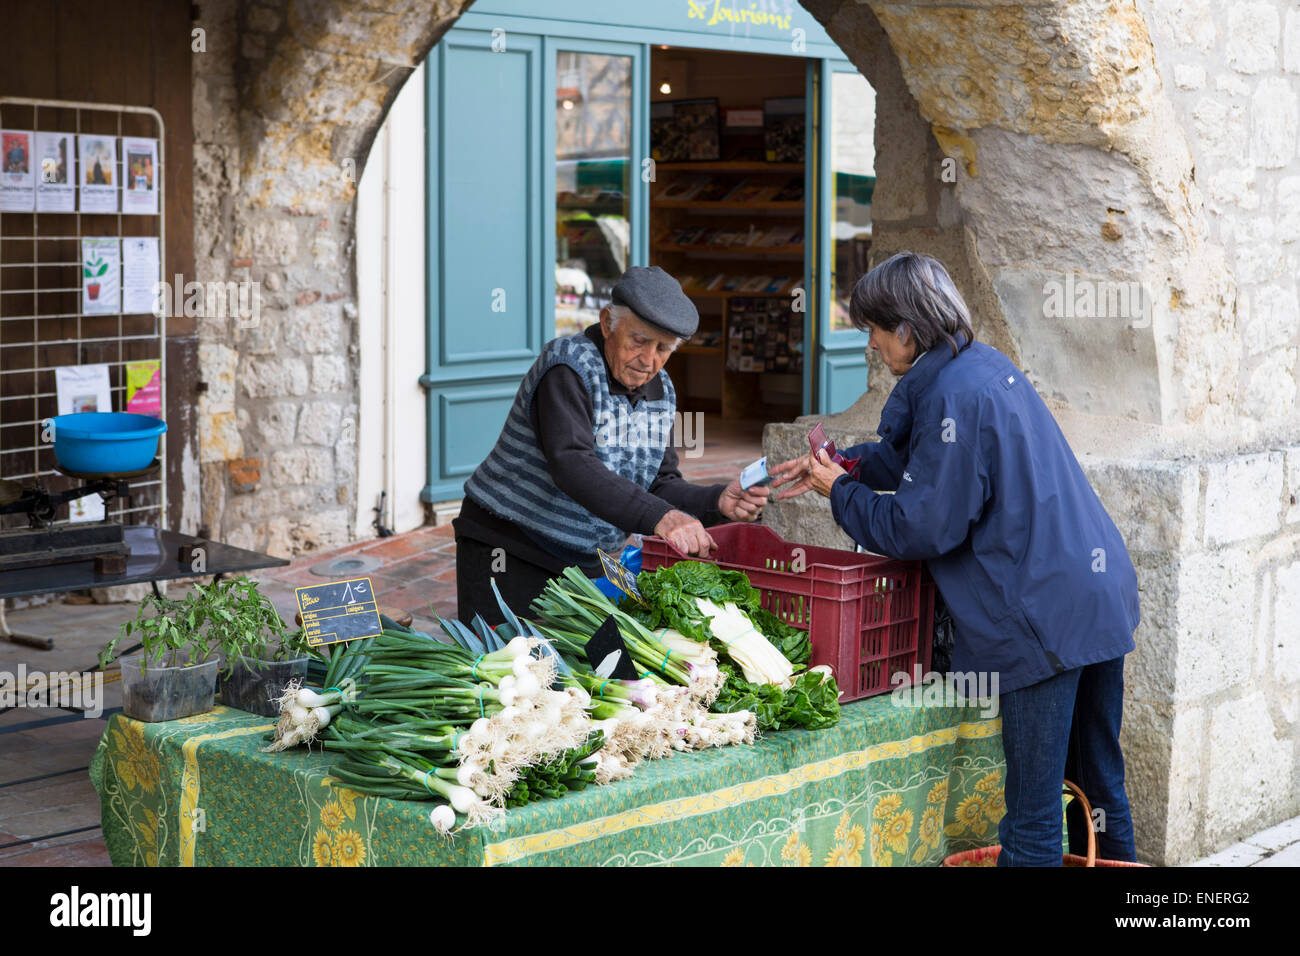 Local market of Lauzerte with a stand for vegetables Stock Photo